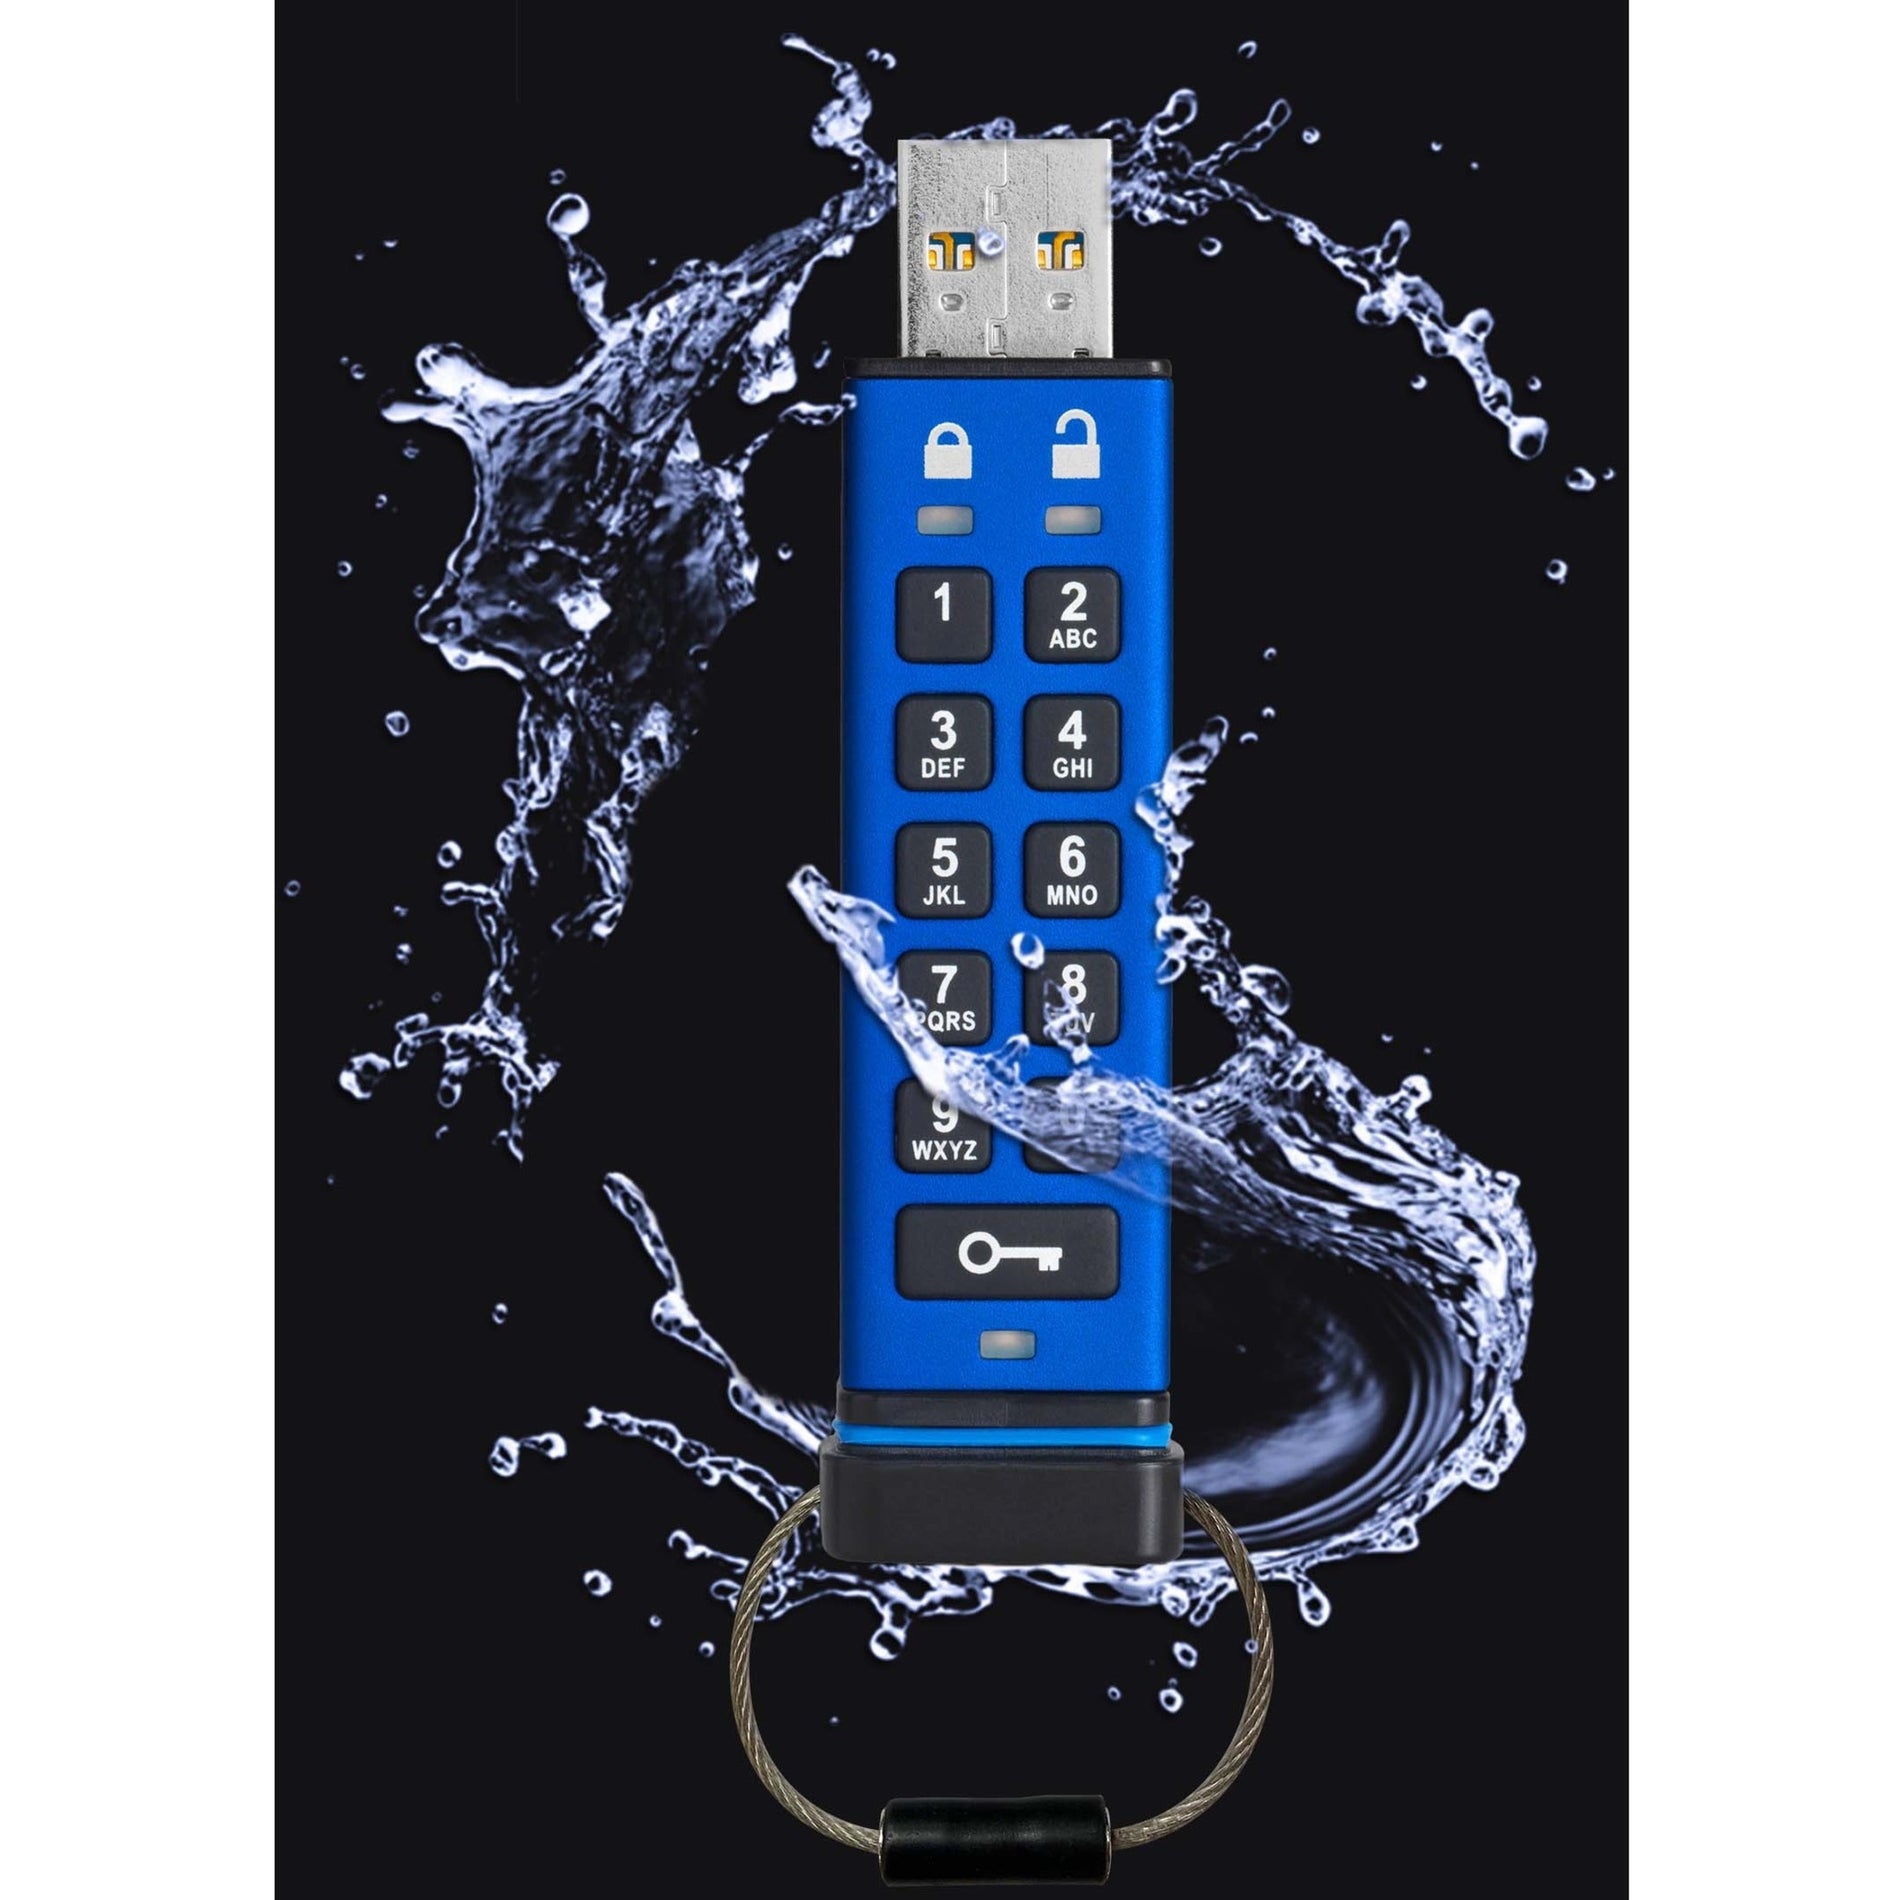 iStorage IS-FL-DA3-256-8 datAshur PRO 8GB USB 3.2 (Gen 1) Type A Flash Drive, Secure, FIPS 140-2 Level 3 Certified, Password Protected, Dust/Water Resistant